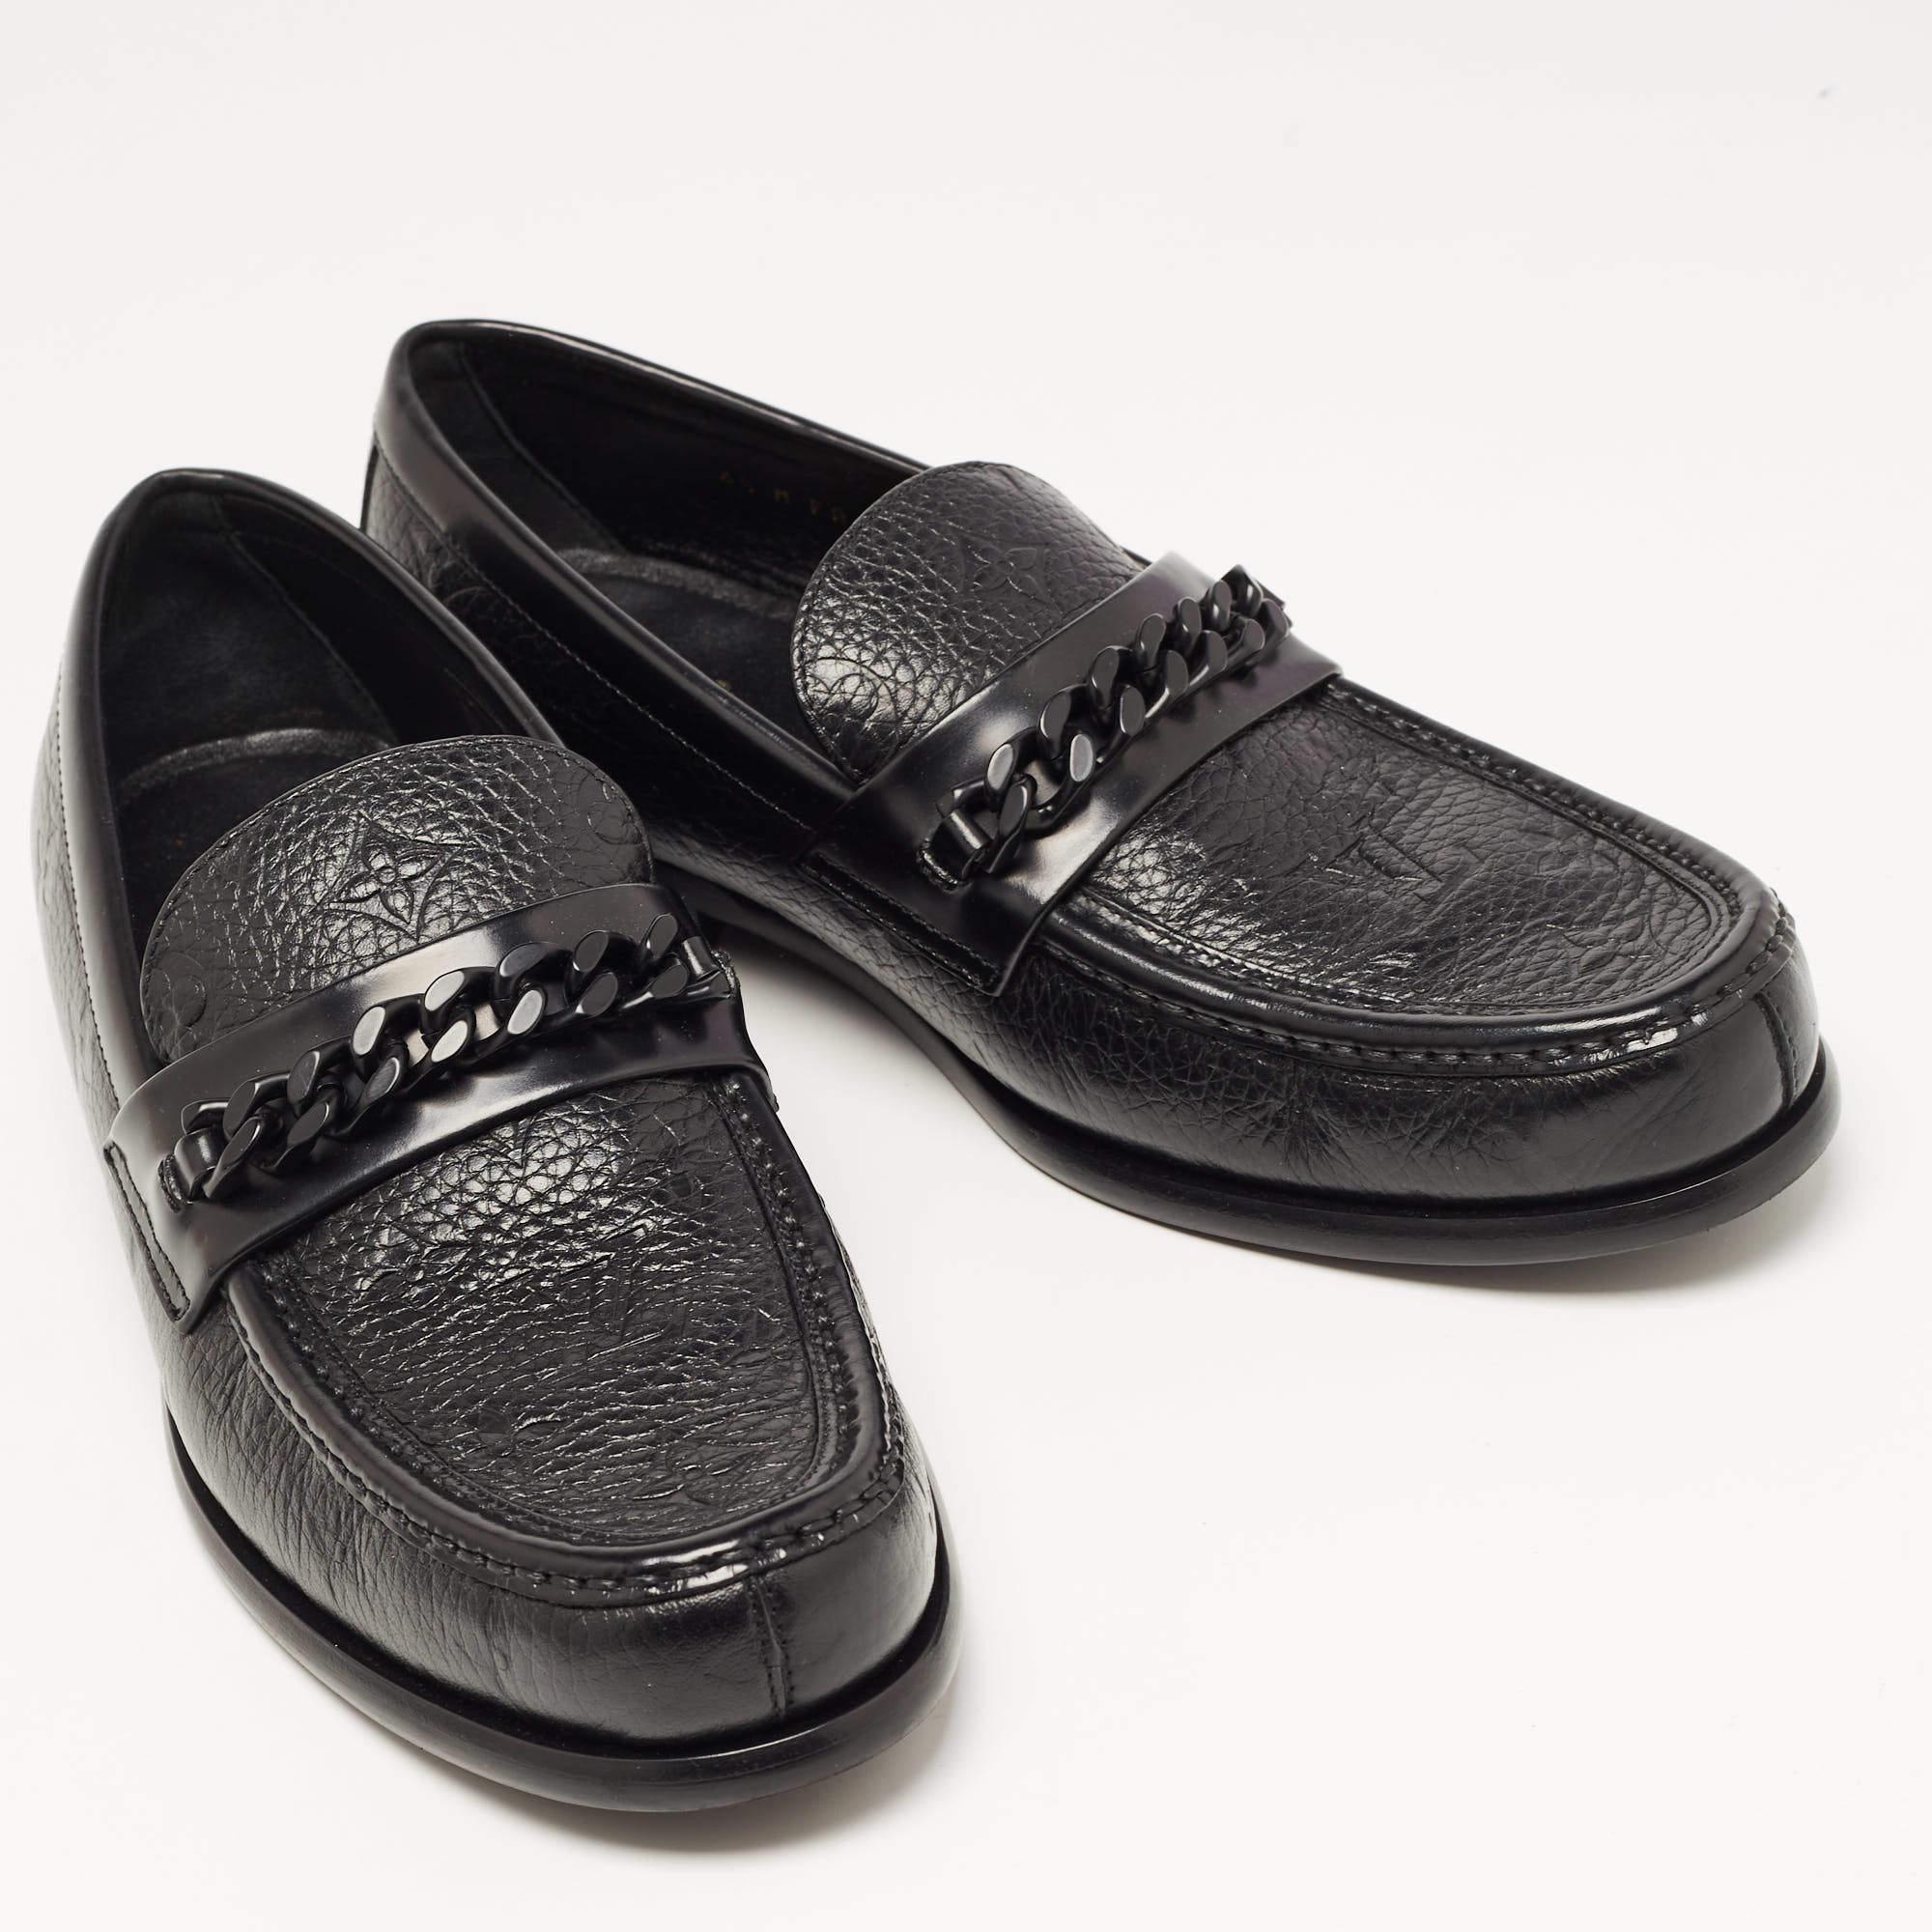 Louis Vuitton Black Leather Slip On Loafers Size 40.5 For Sale 1